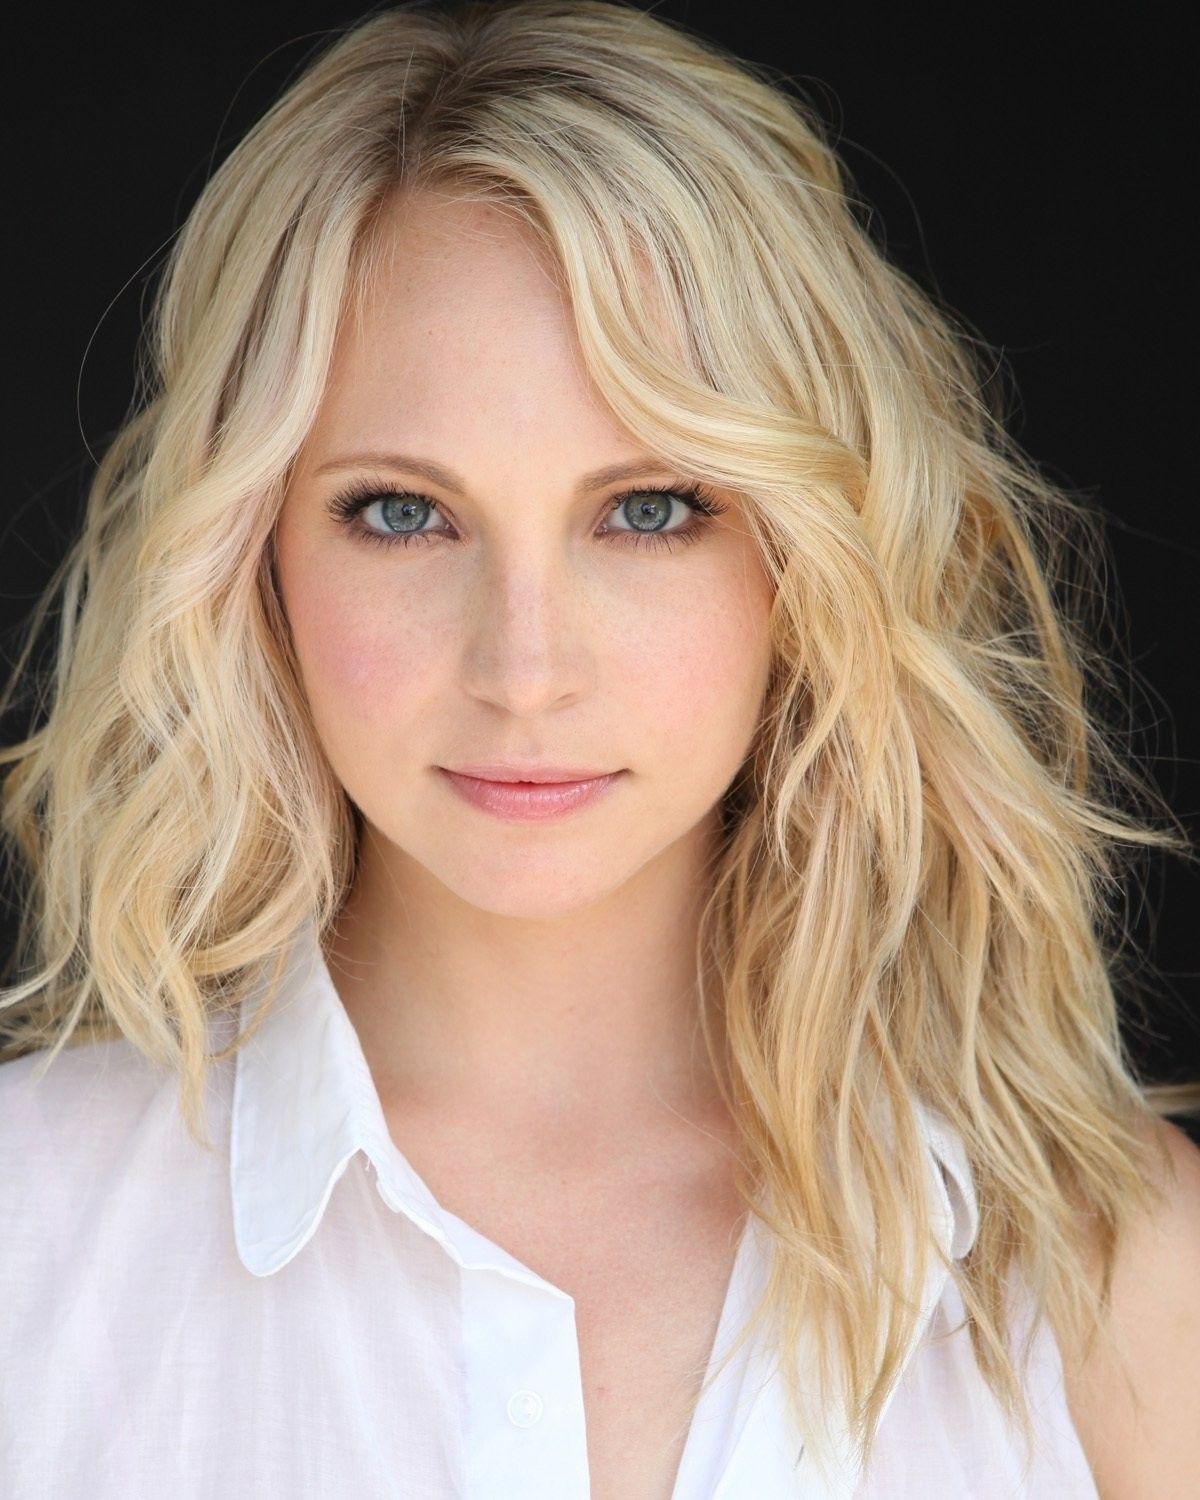 Candice Accola, TV Actress. Leaked Celebs. Candice